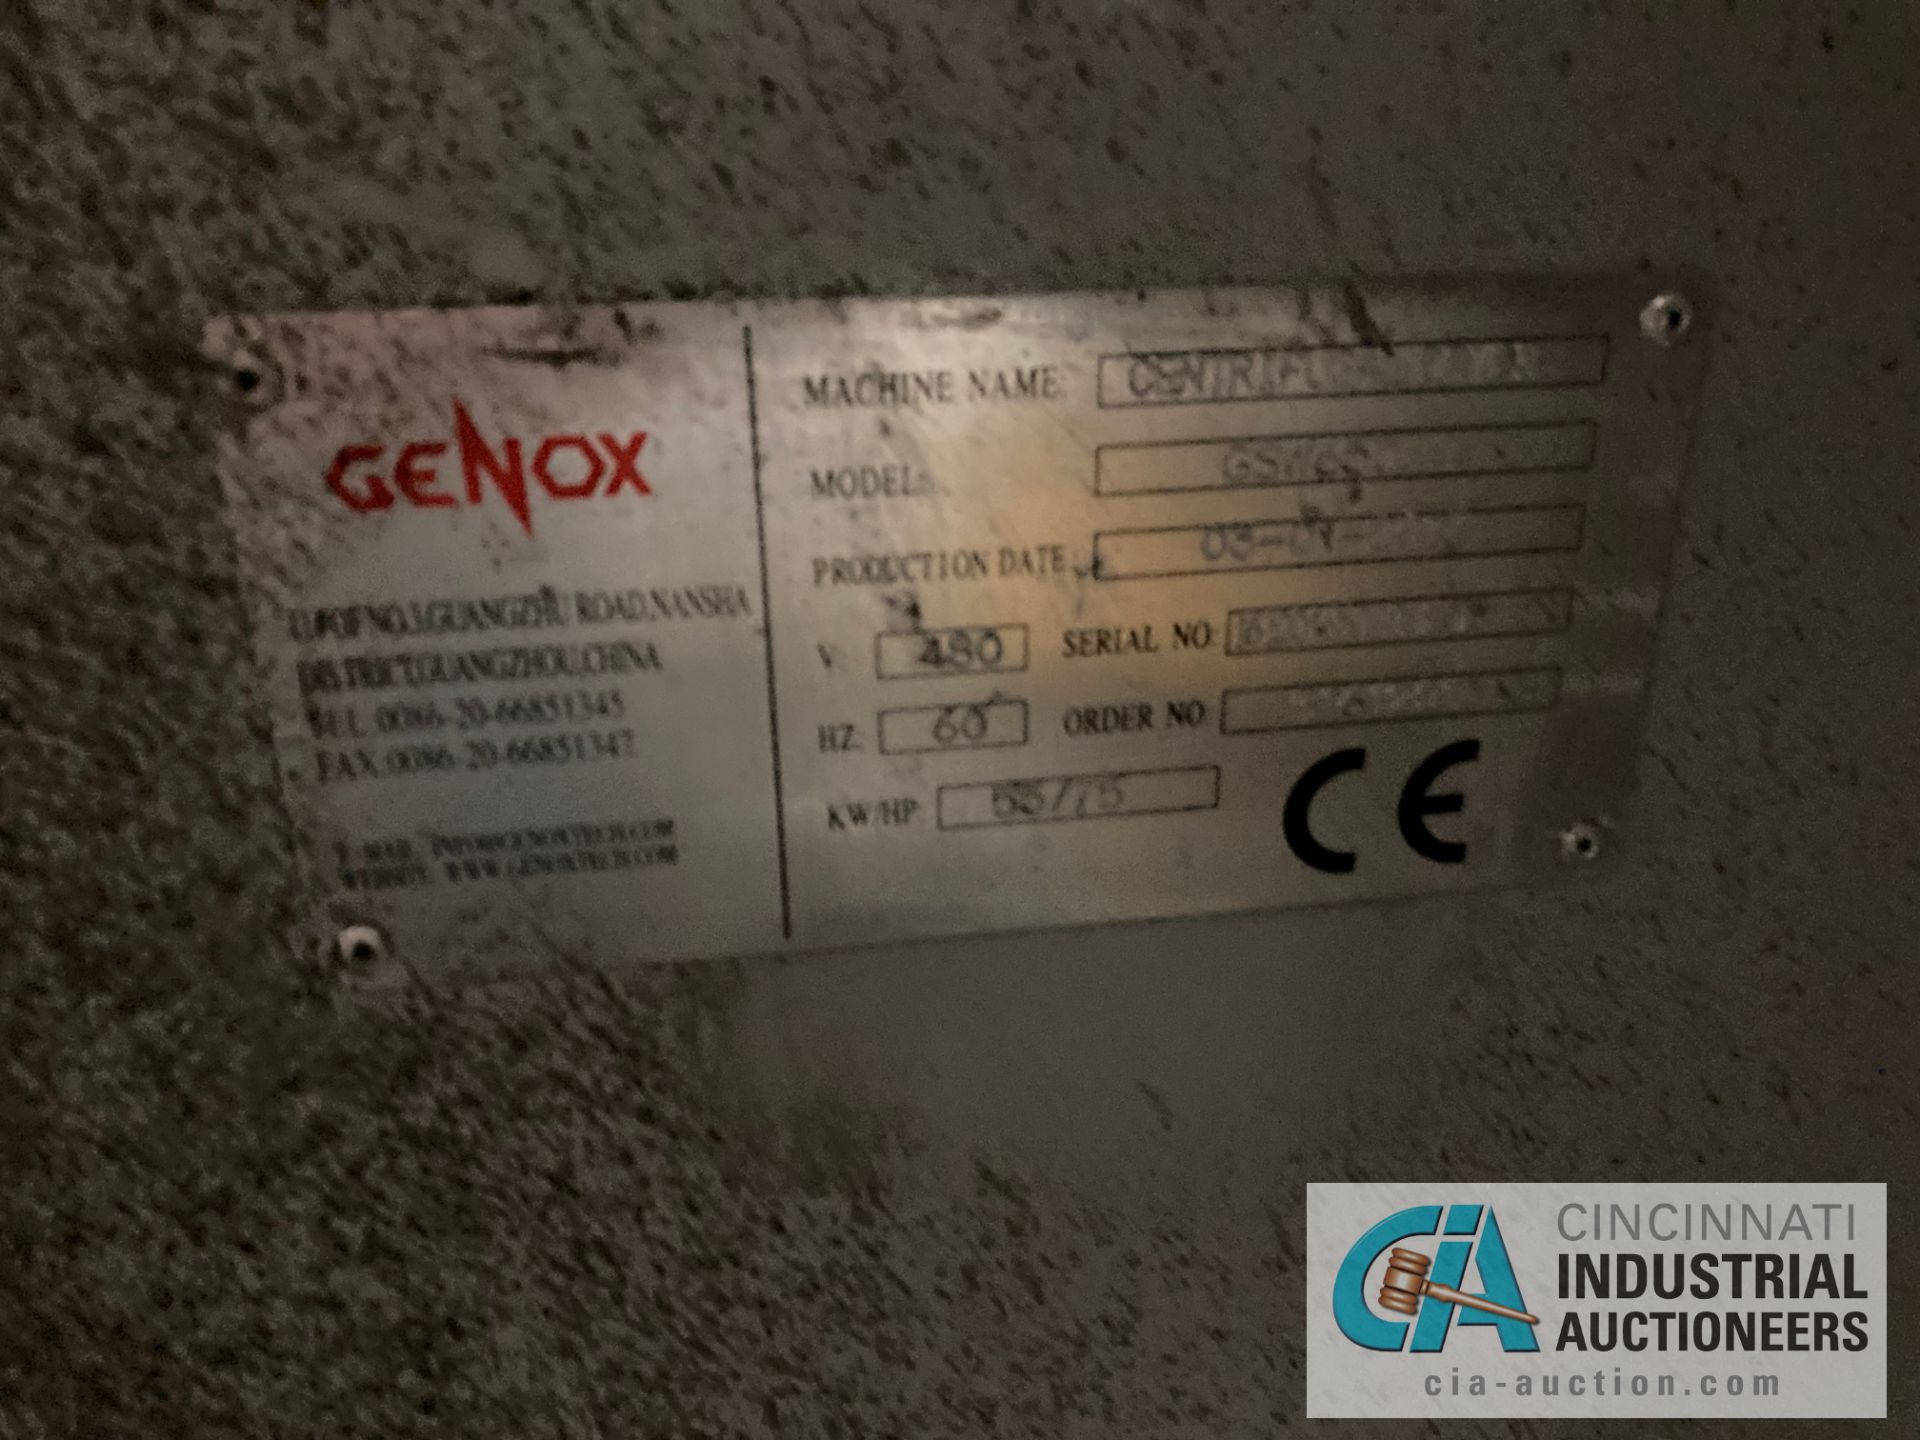 55 KW GENOX MODEL GS650-2 CENTRIFUGAL DRYER; S/N 161201650-2-KY5, 48" DIAMETER X 50", WITH CONTROL - Image 6 of 6